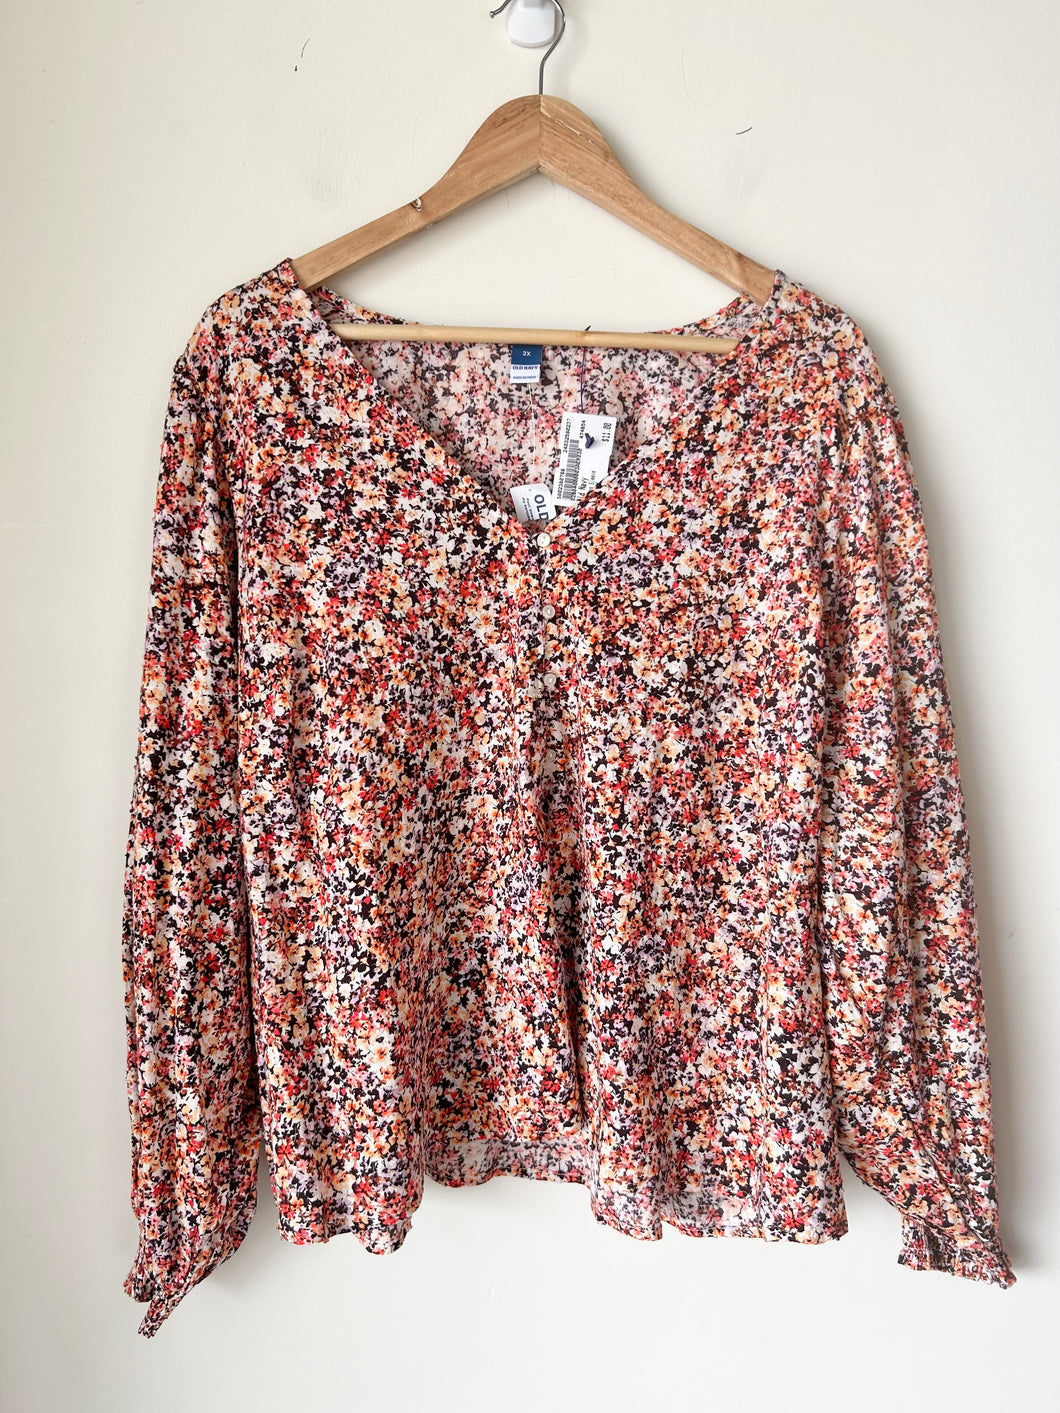 Old Navy Long Sleeve Top Size 2XL